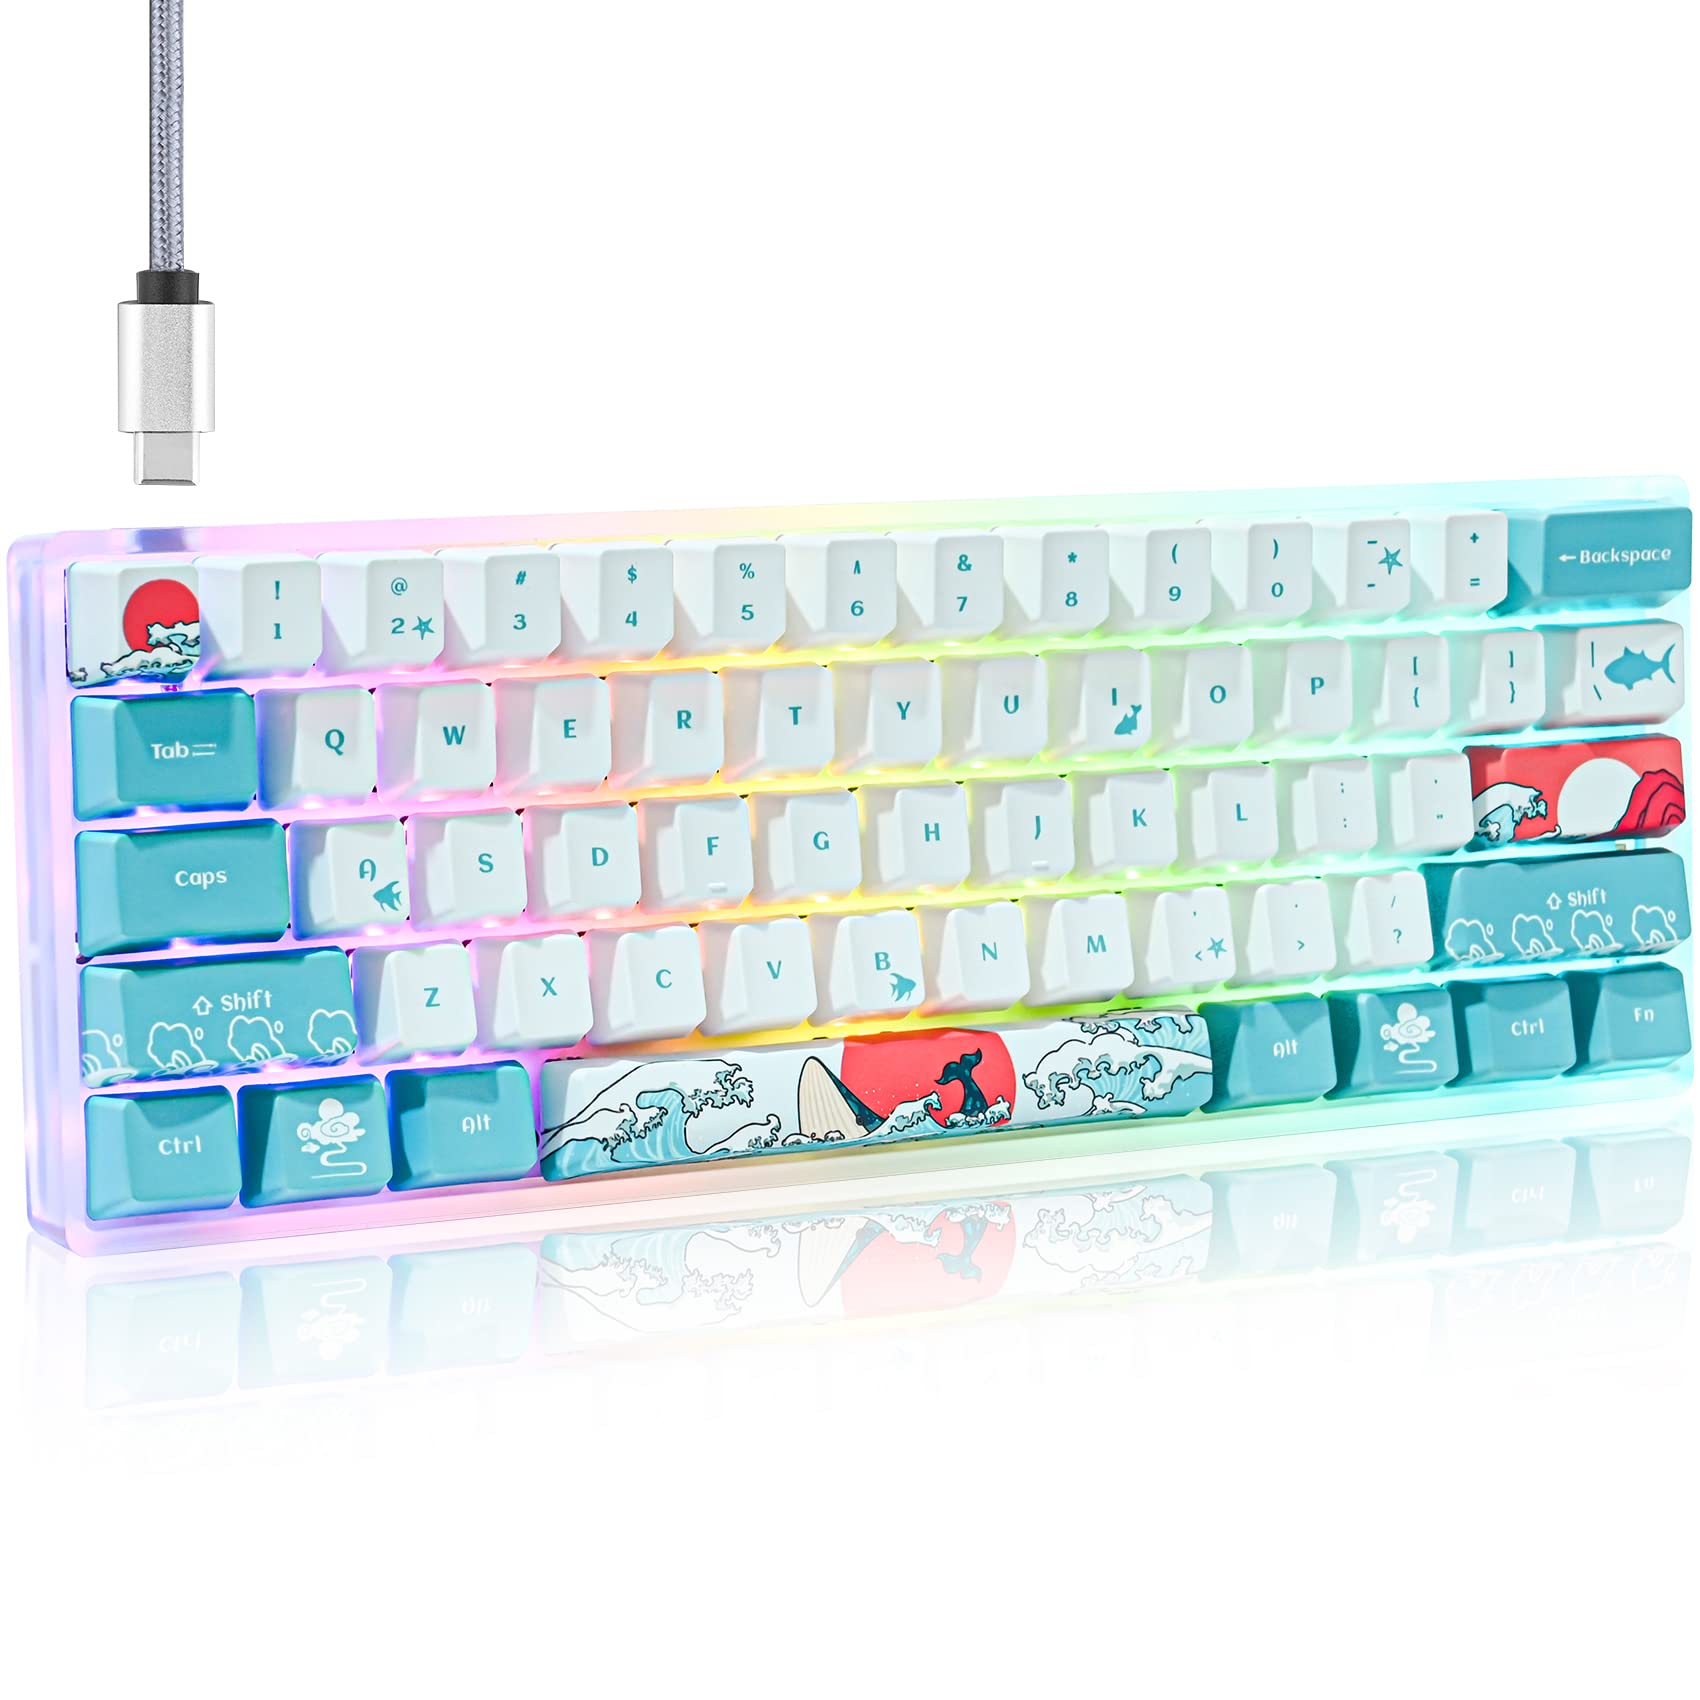 Guffercty kred Gk61 60% Gaming Keyboard Red Switch SK61 Custom Hot Swappable Mechanical Keyboard 60 Percent with RGB Backlit Type-C for Win/PC/Mac (Gateron Optical Red, Coral Sea)